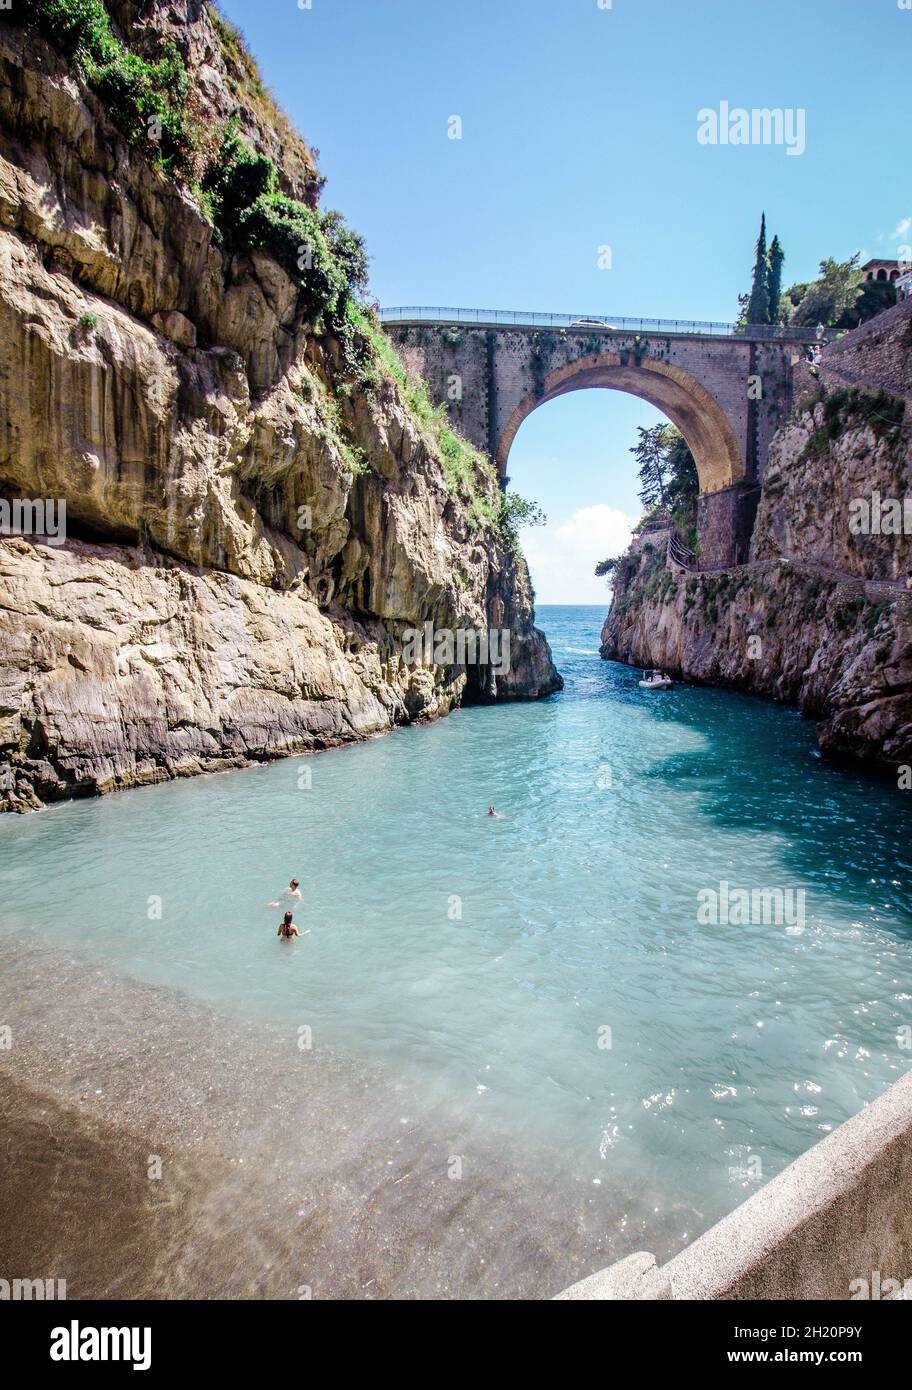 Fiordo di Furore is an arched stone bridge crosses this striking gorge with a tiny, rocky beach at its base. Stock Photo